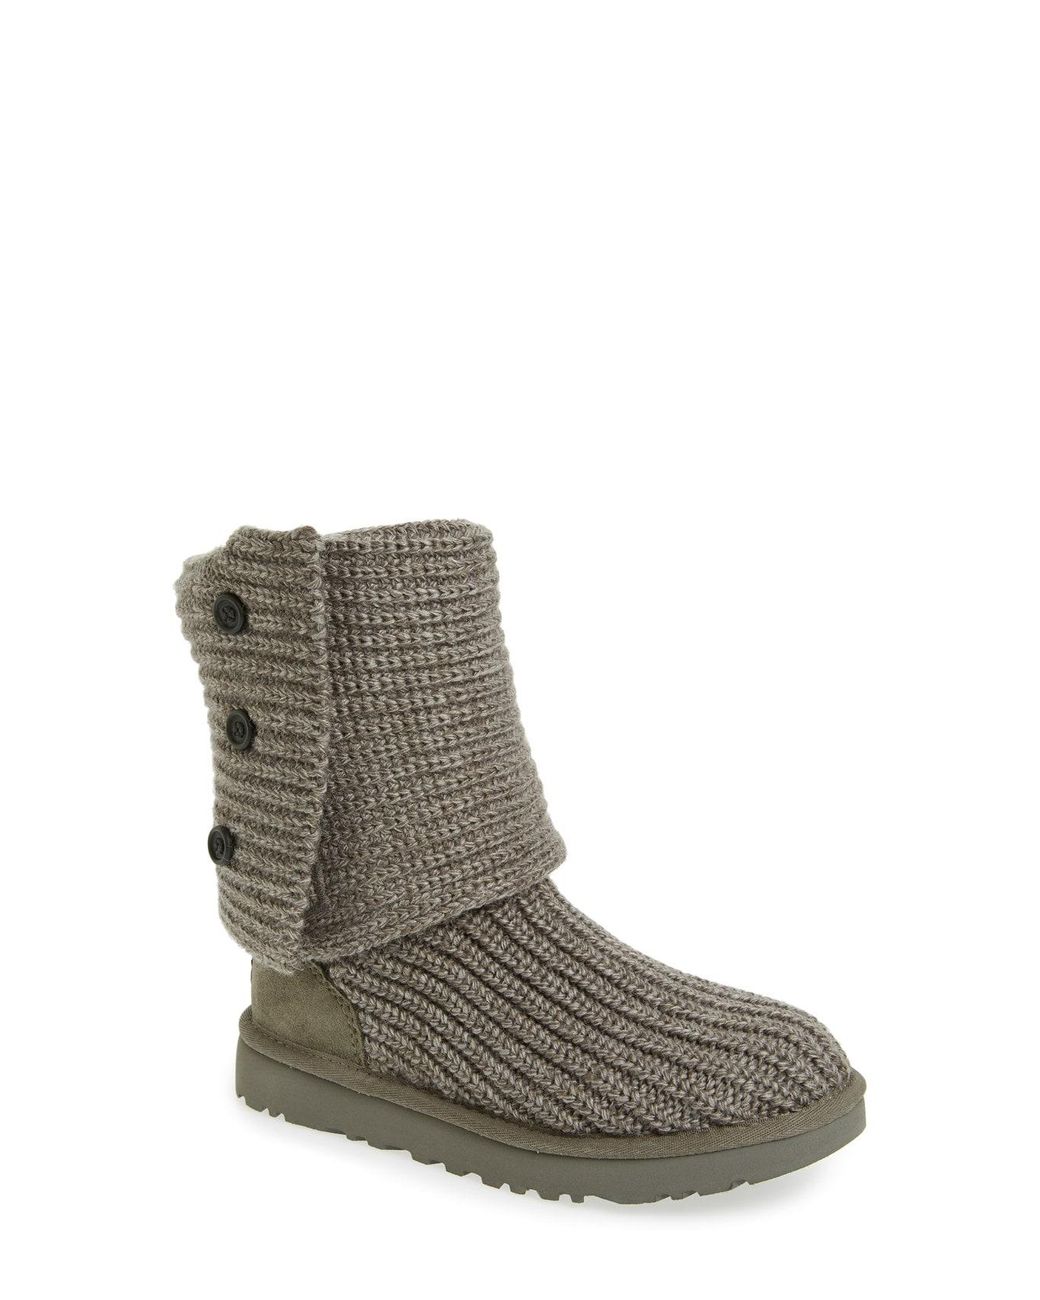 Lyst - Ugg Ugg Classic Cardy Ii Knit Boot in Gray